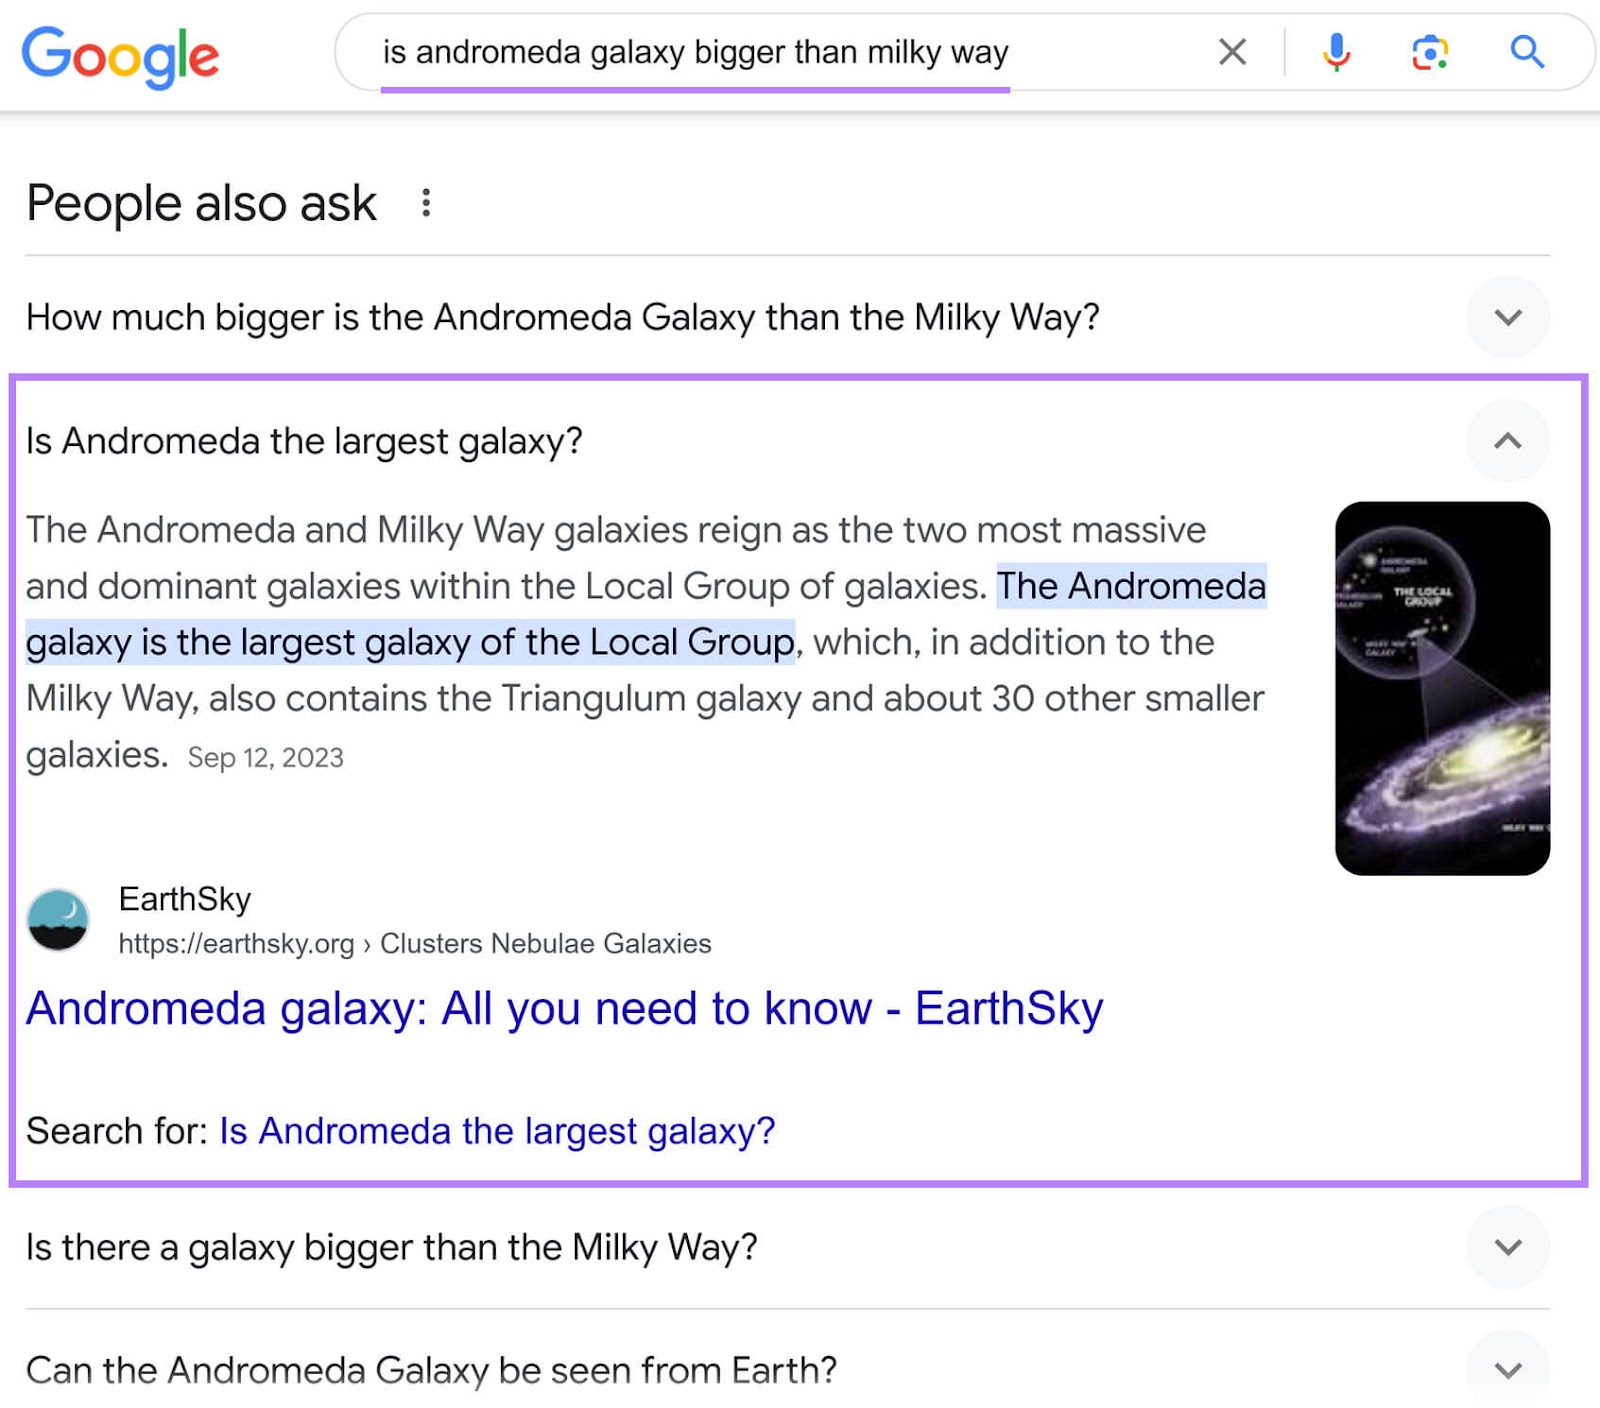 Google SERP for "is andromeda galaxy bigger than milky way" showing the "People also ask" box, with one question expanded.